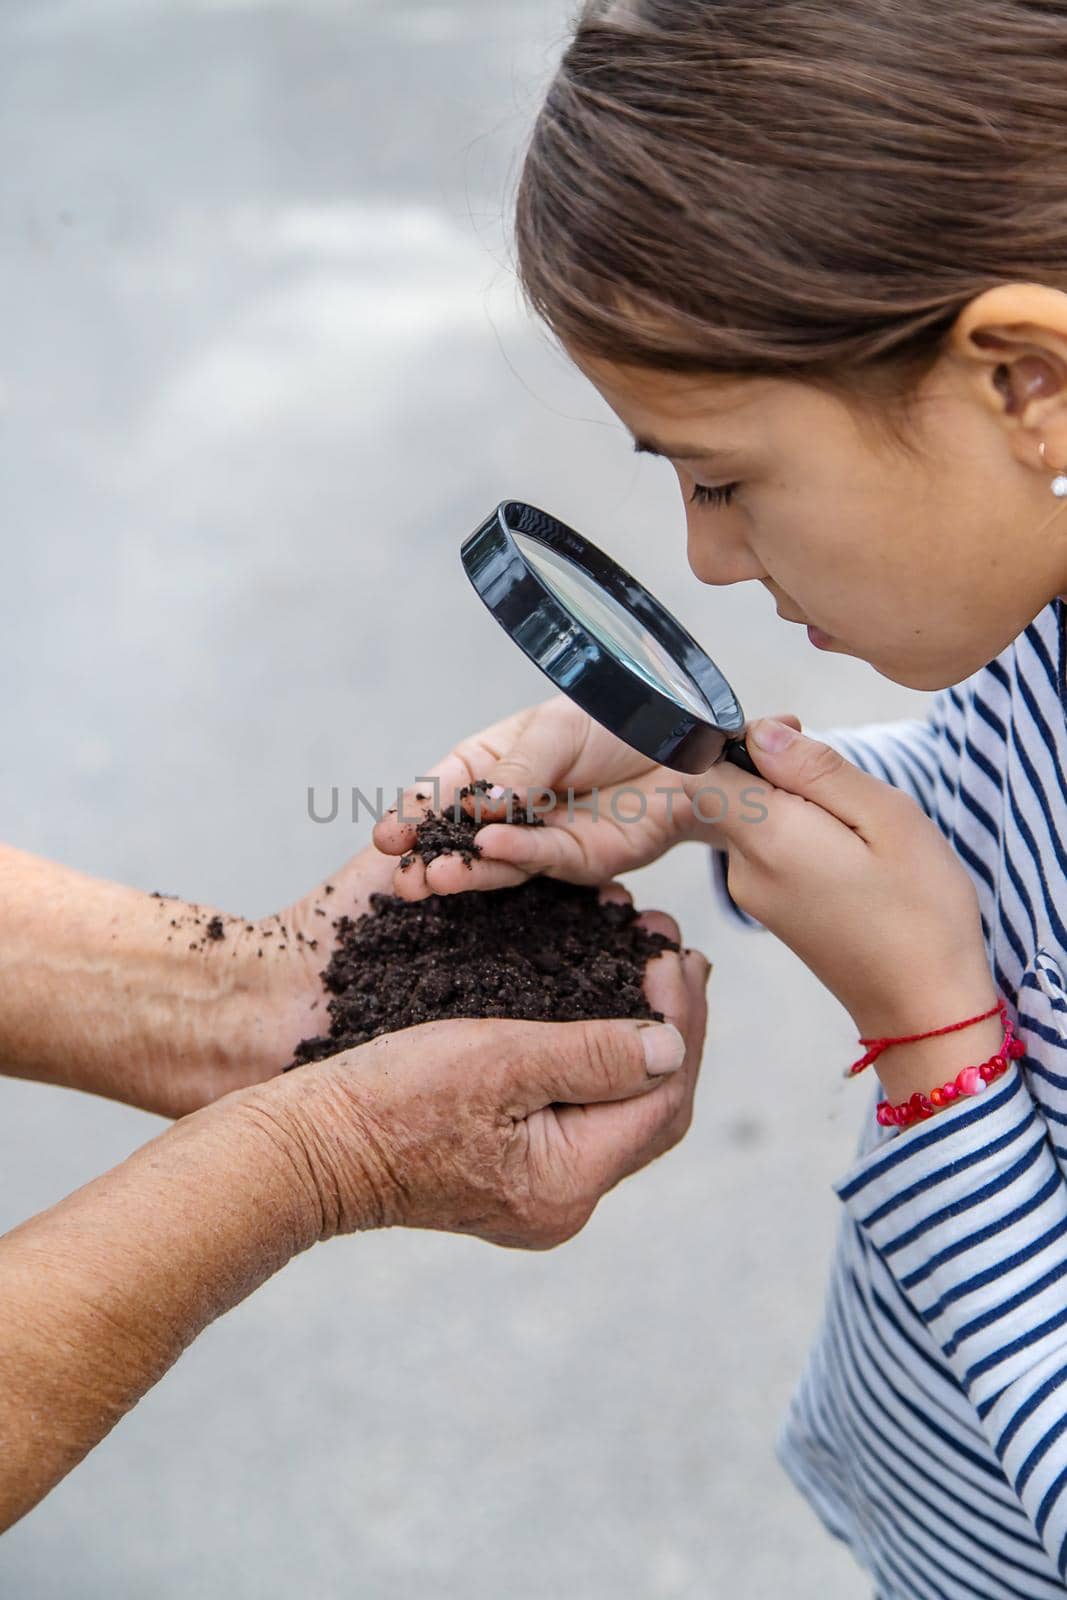 The child examines the soil with a magnifying glass. Selective focus. Kid.